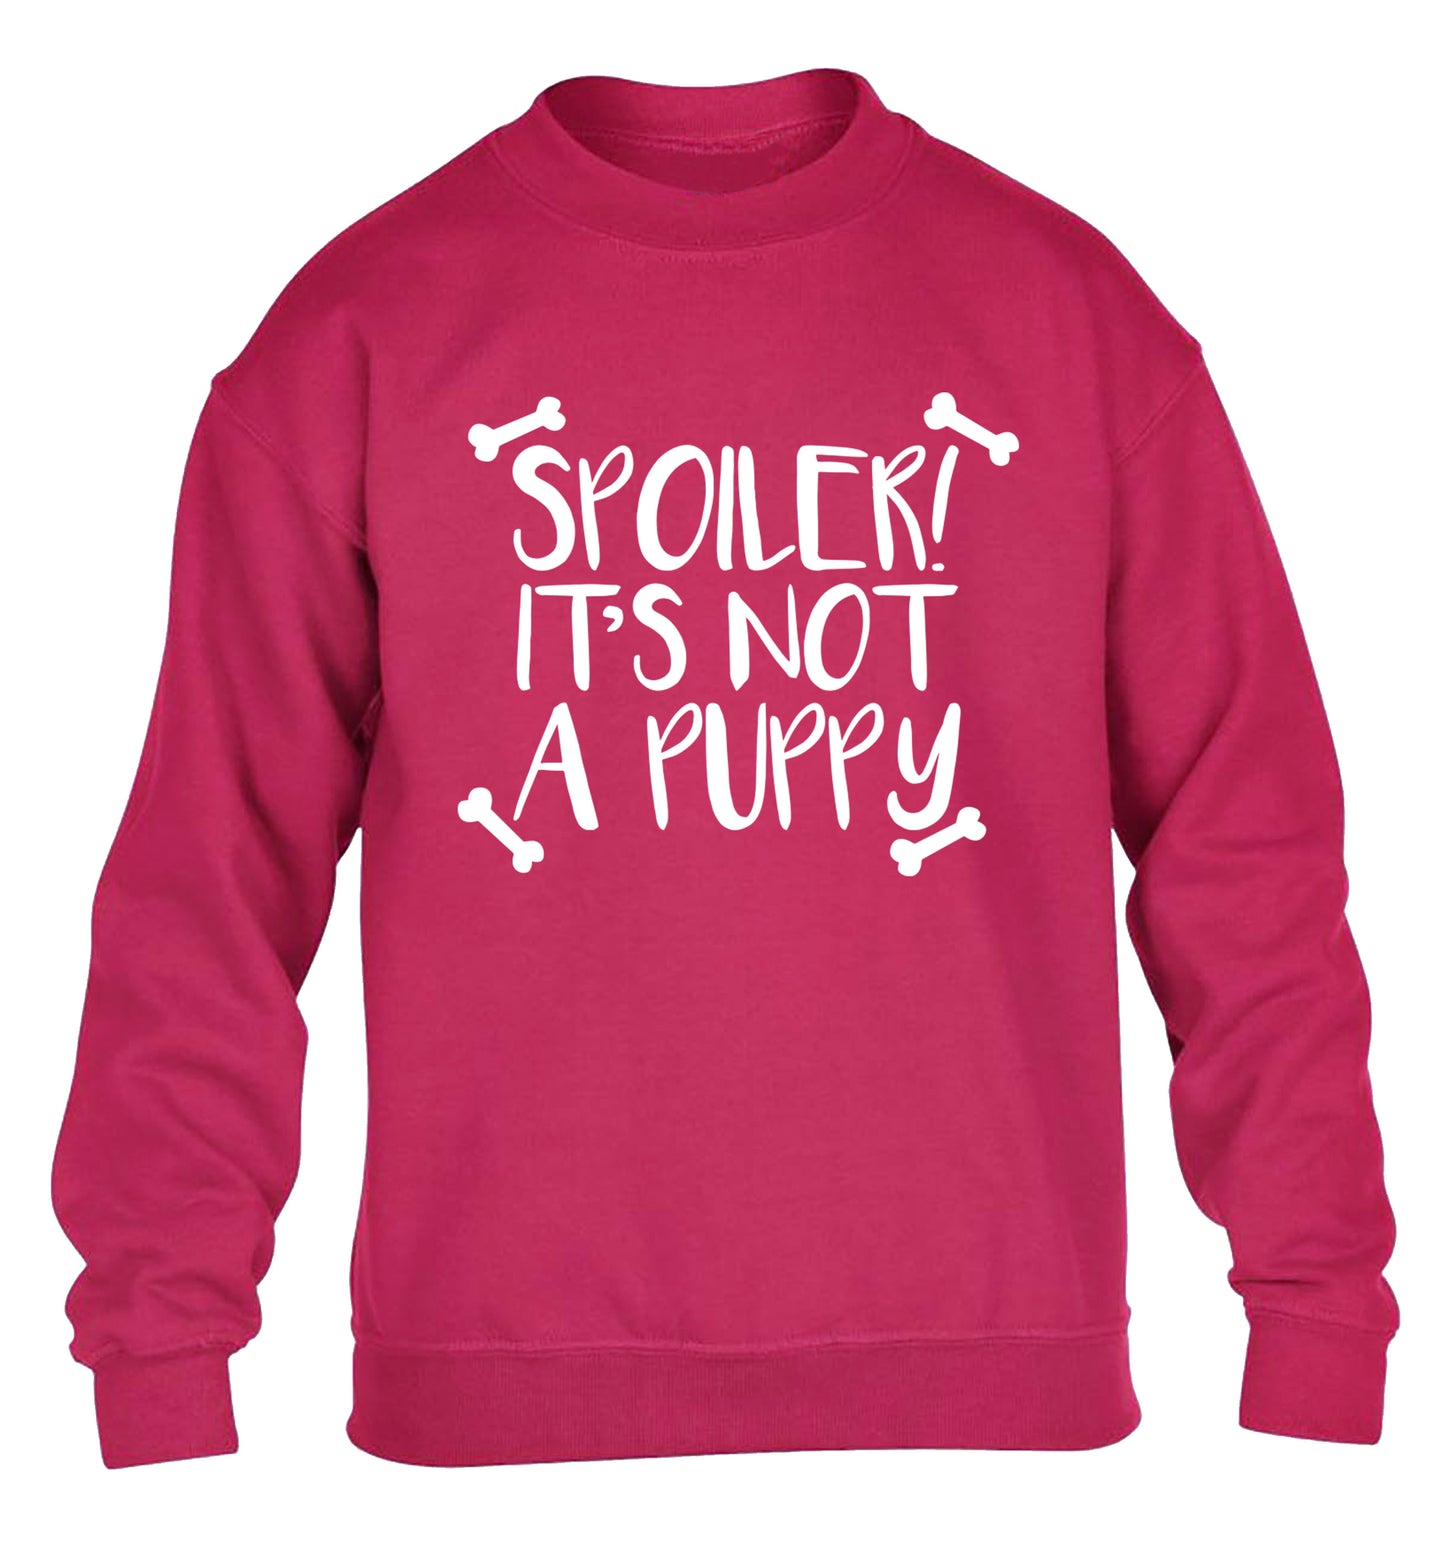 Spoiler it's not a puppy children's pink sweater 12-13 Years